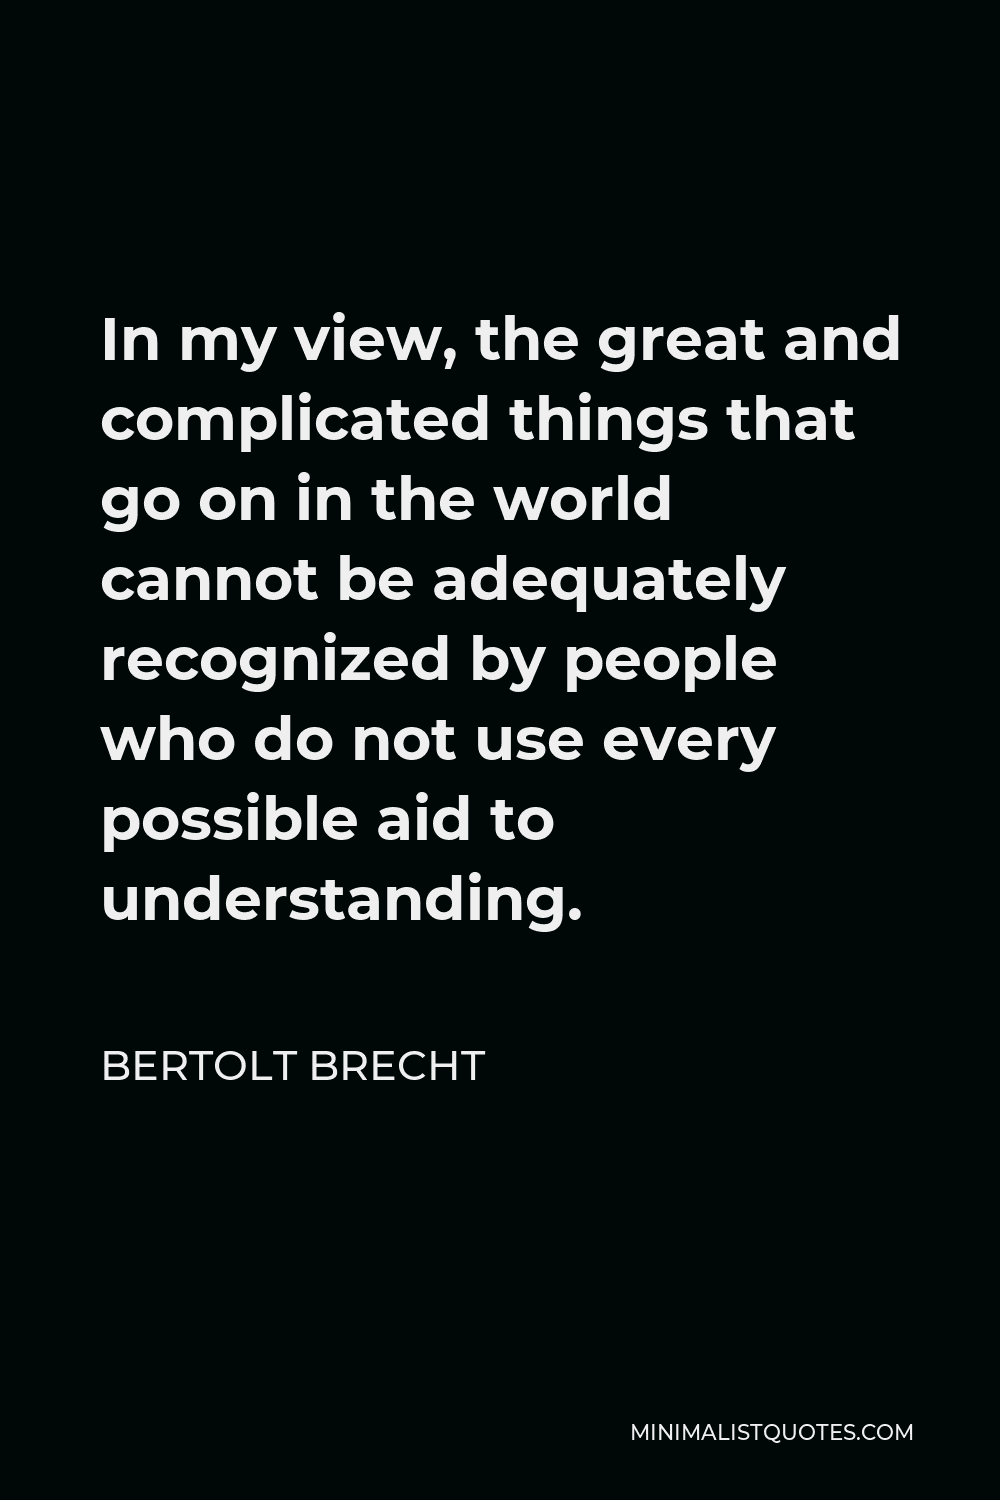 Bertolt Brecht Quote - In my view, the great and complicated things that go on in the world cannot be adequately recognized by people who do not use every possible aid to understanding.